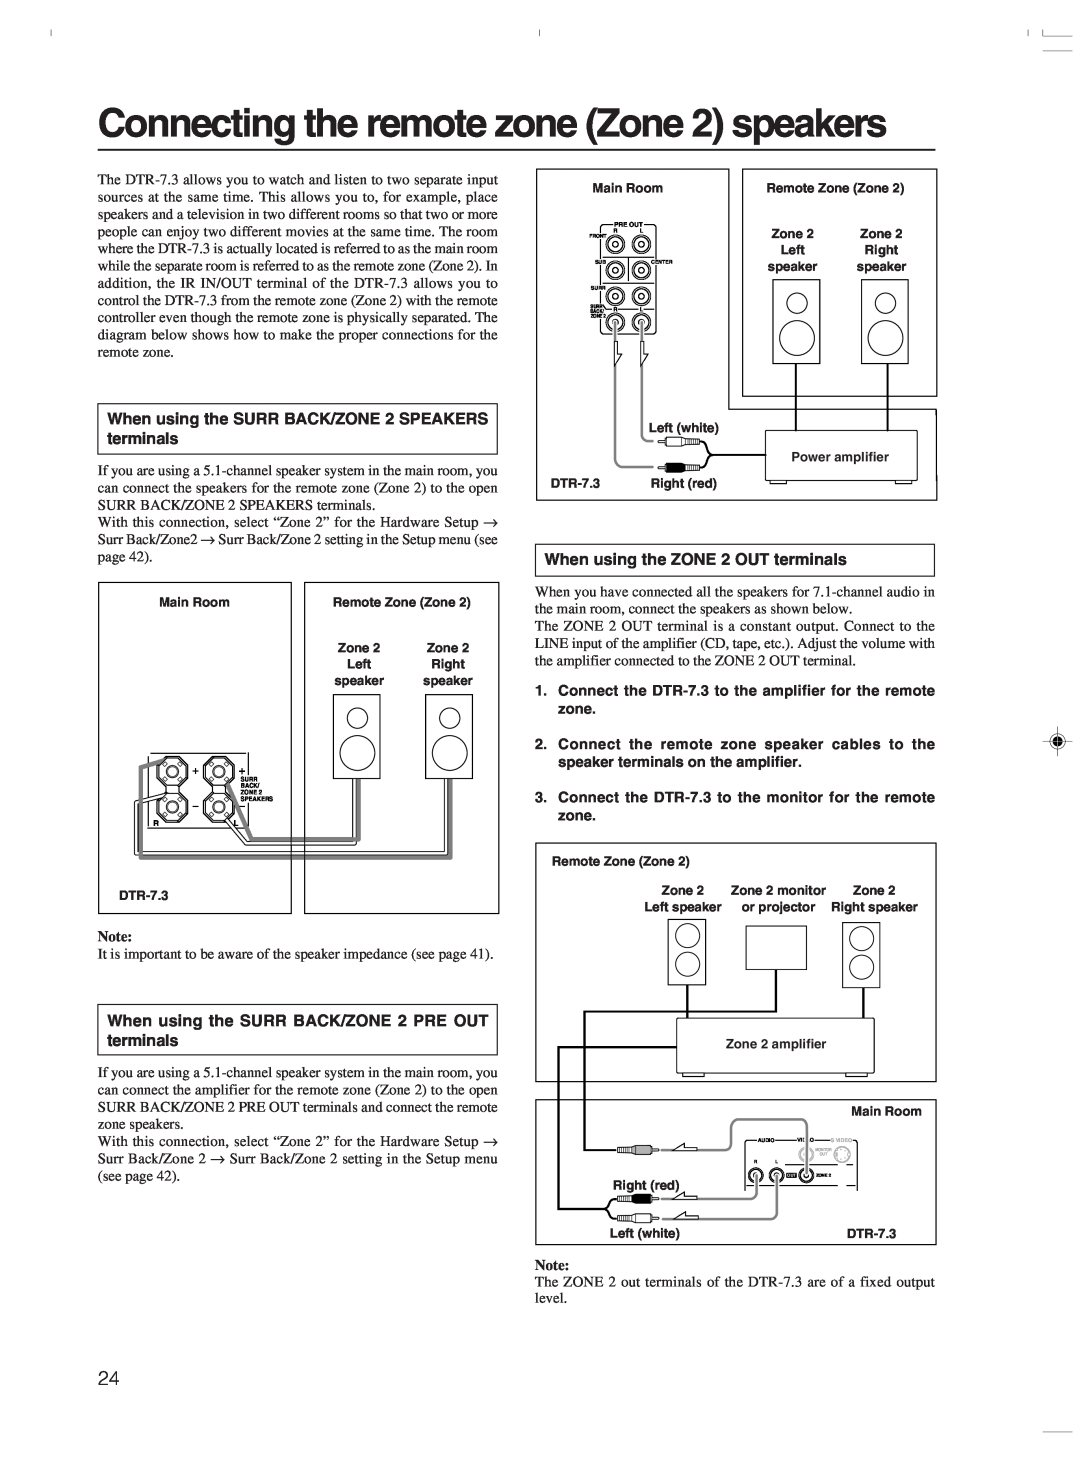 Integra DTR-7.3 instruction manual Connecting the remote zone Zone 2 speakers, When using the ZONE 2 OUT terminals 